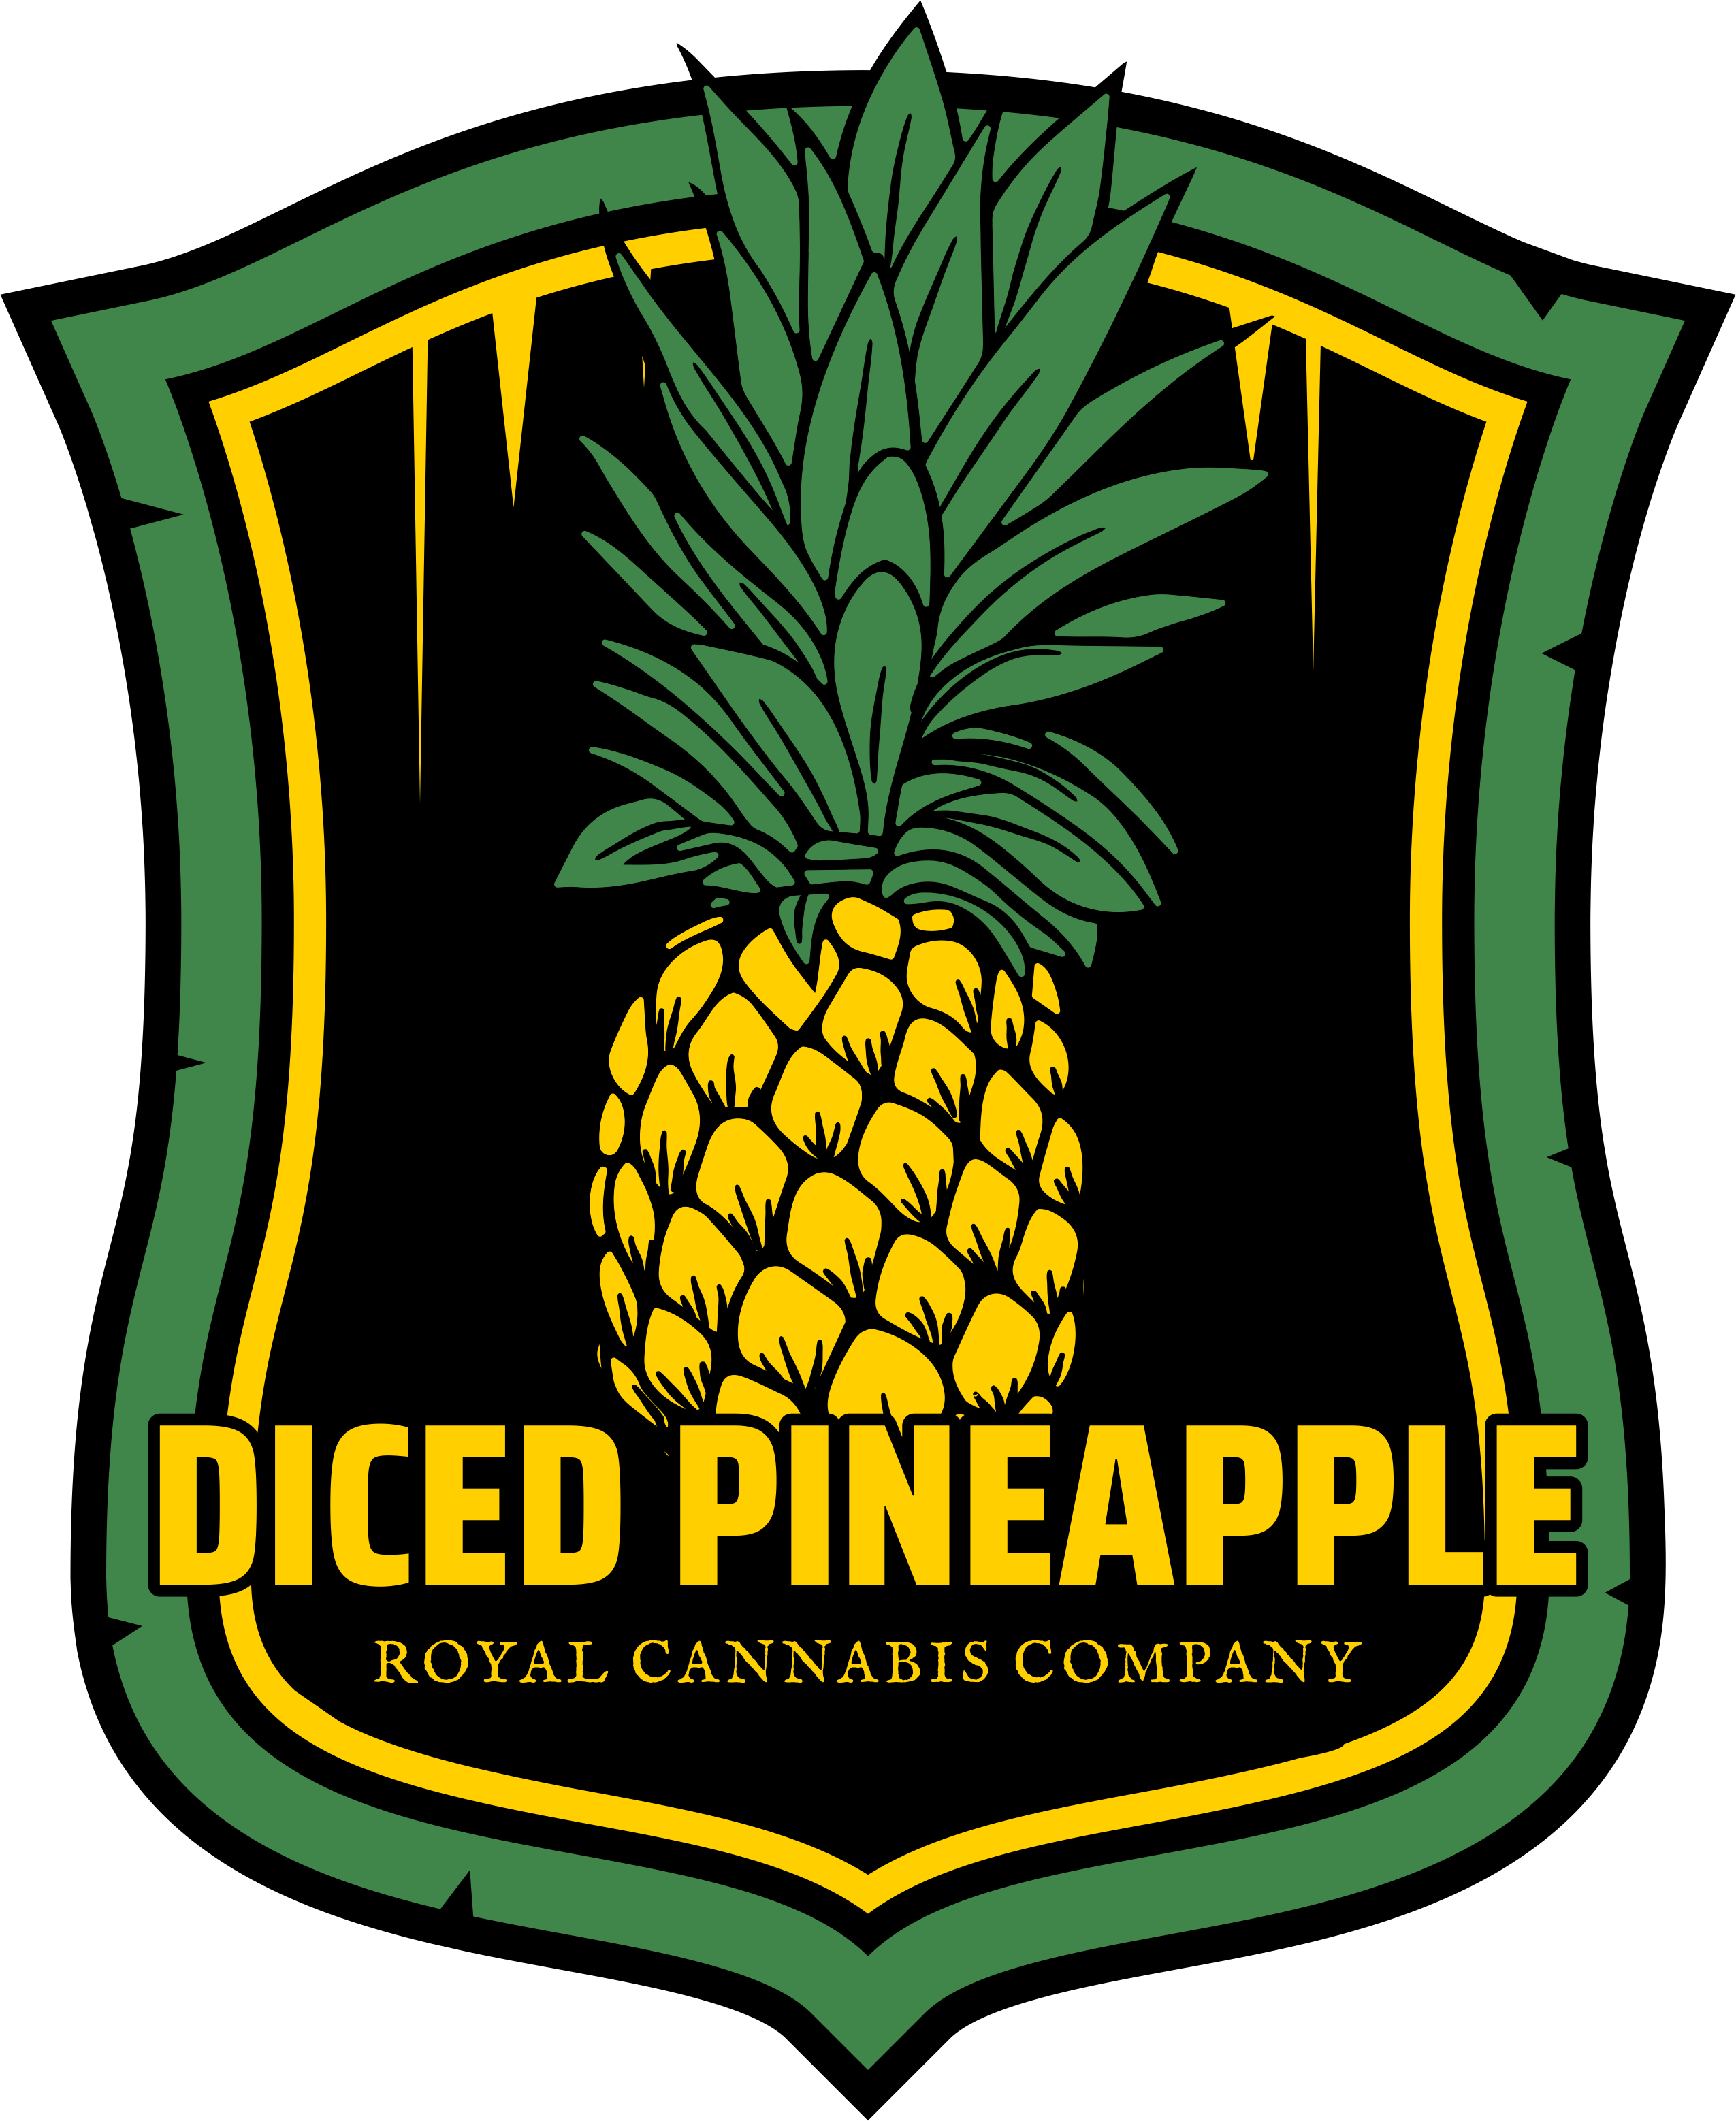 No Logo for Diced Pineapple